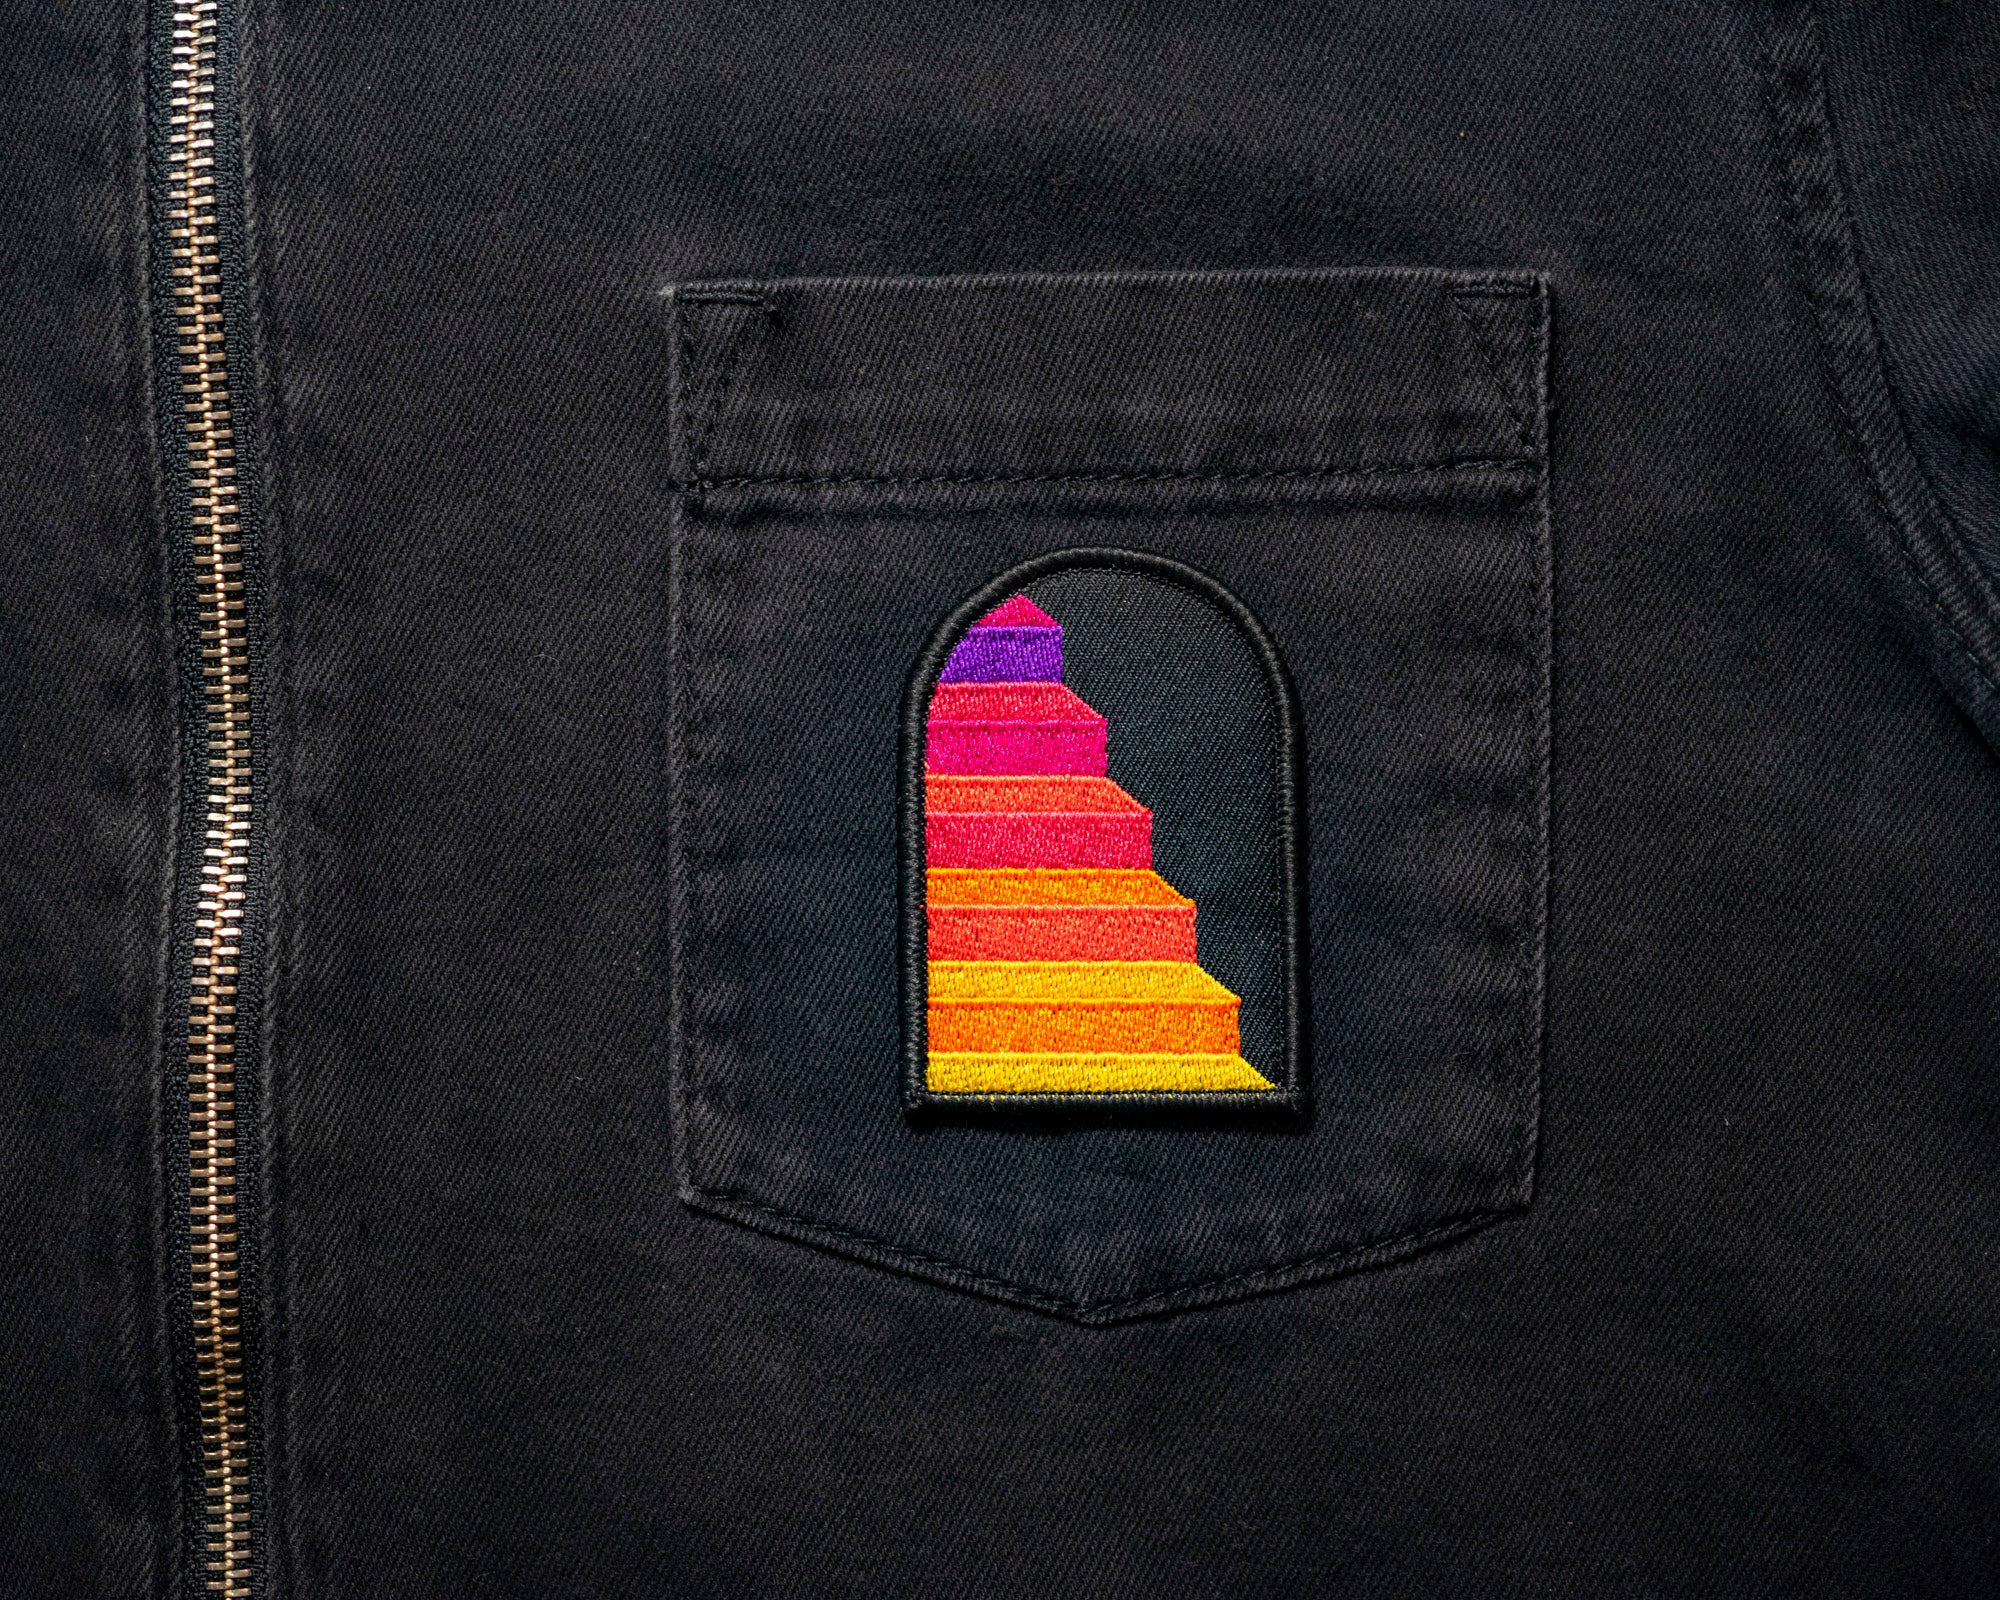 Classic Stairs Embroidered Patch